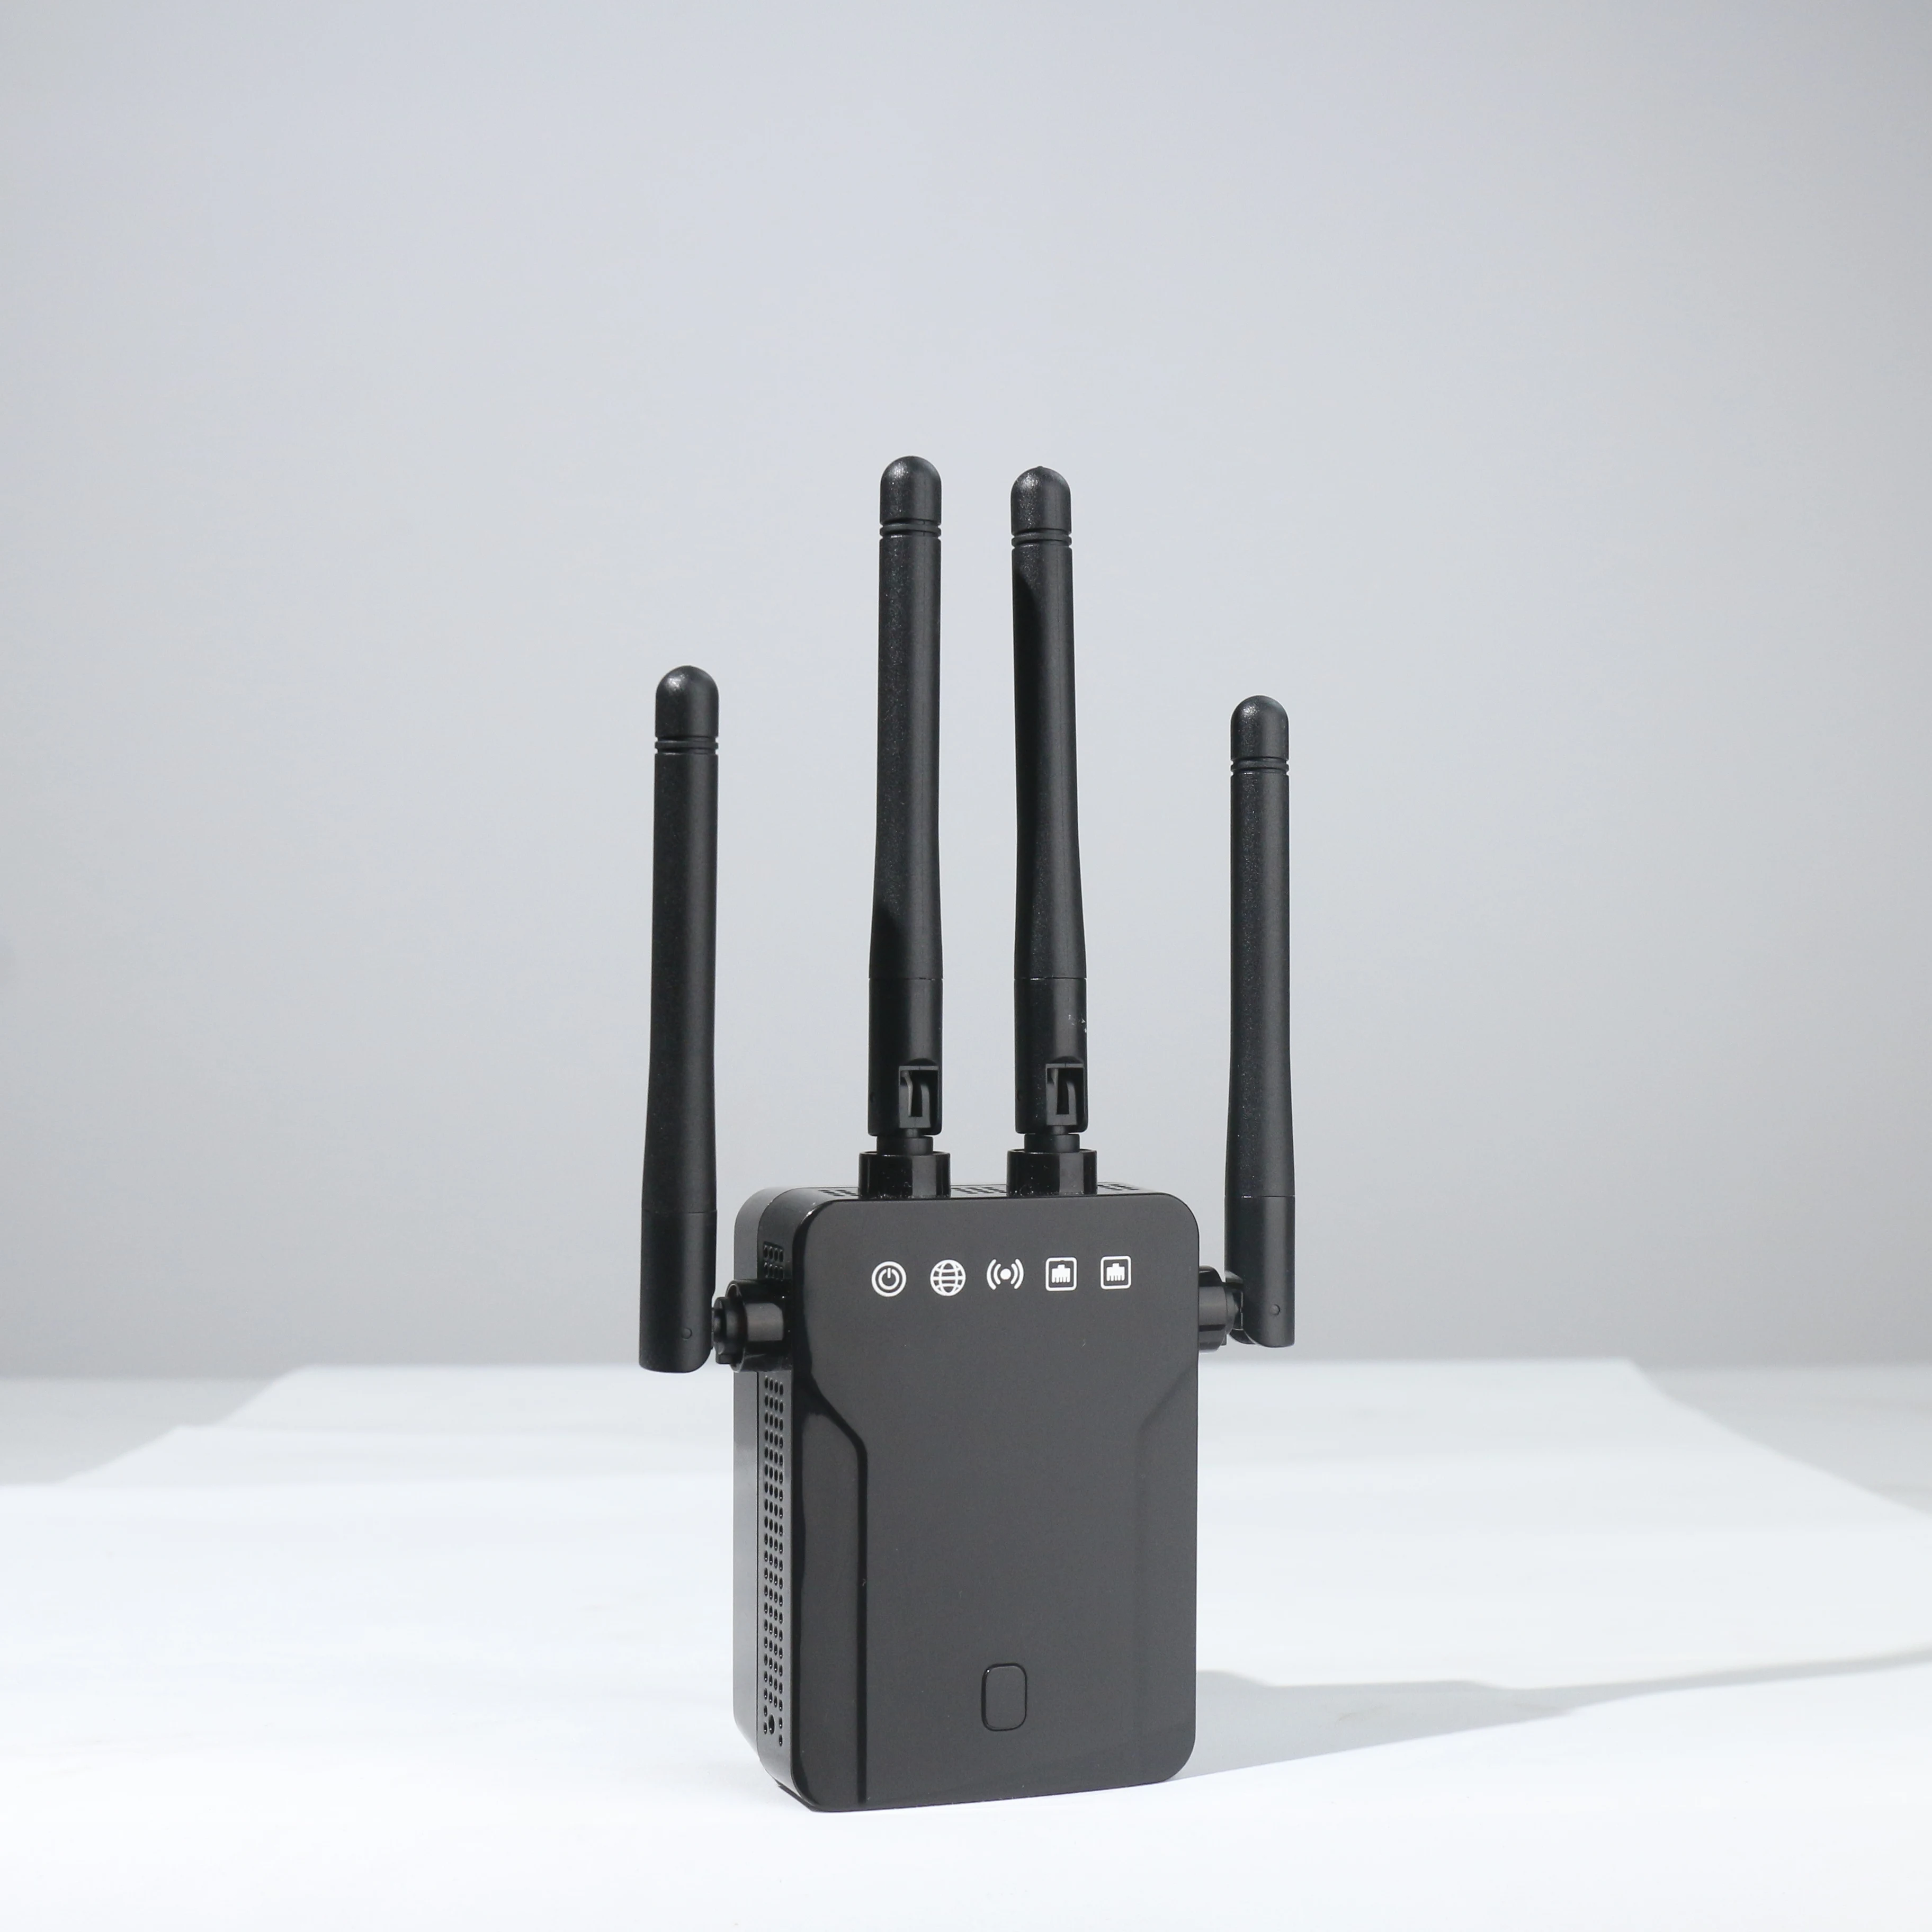 AC1200 300Mbps Dual Band Wifi Repeater Router,2.4G&5G Wireless-N Range Extender 